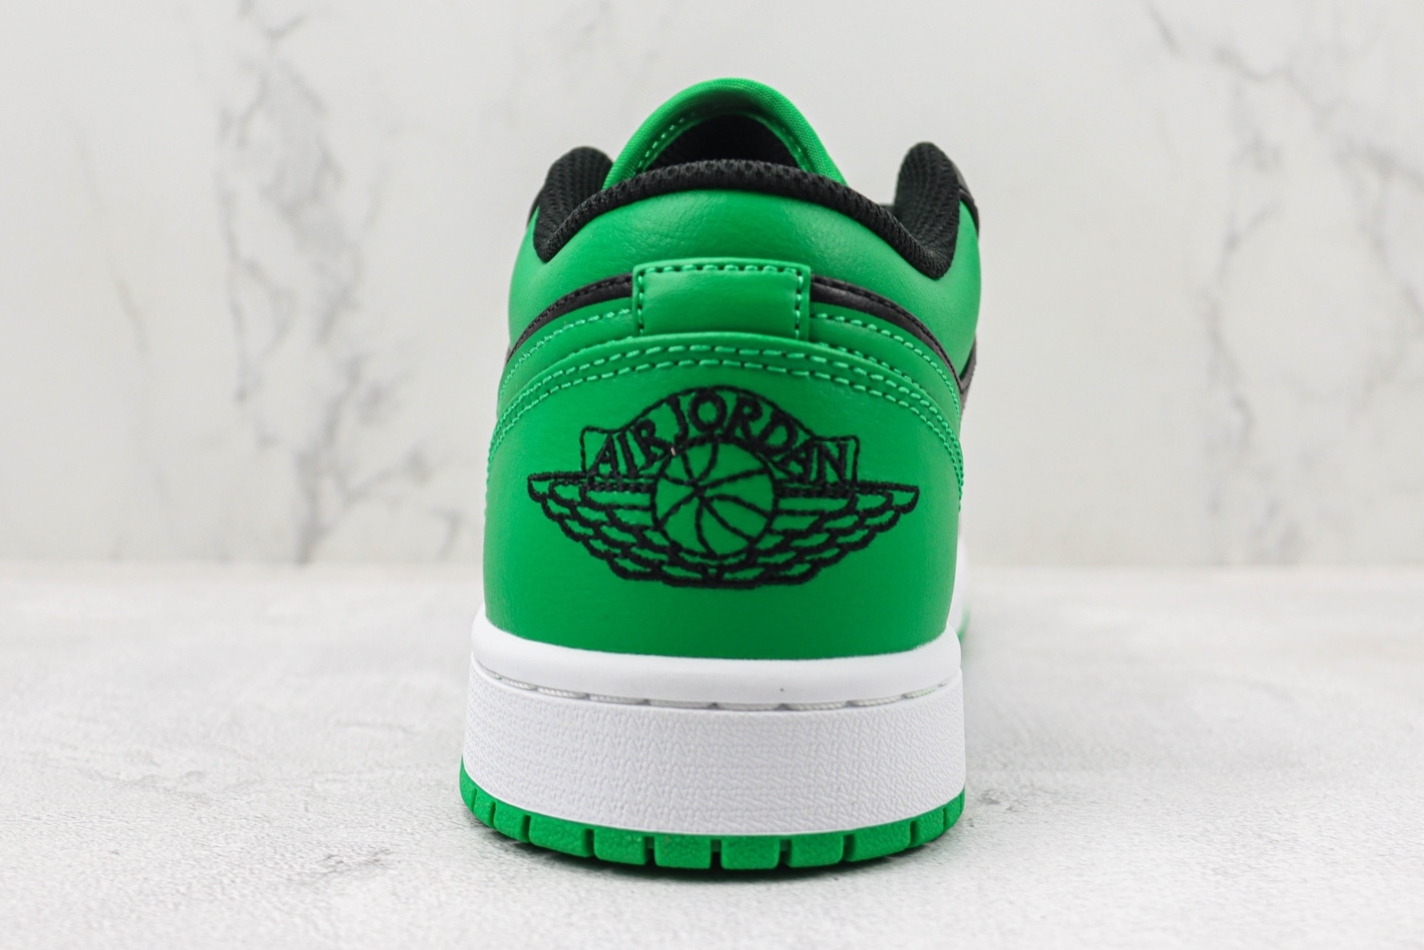 Air Jordan 1 Low 'Lucky Green' 553558-065 | Iconic Sneakers for Style